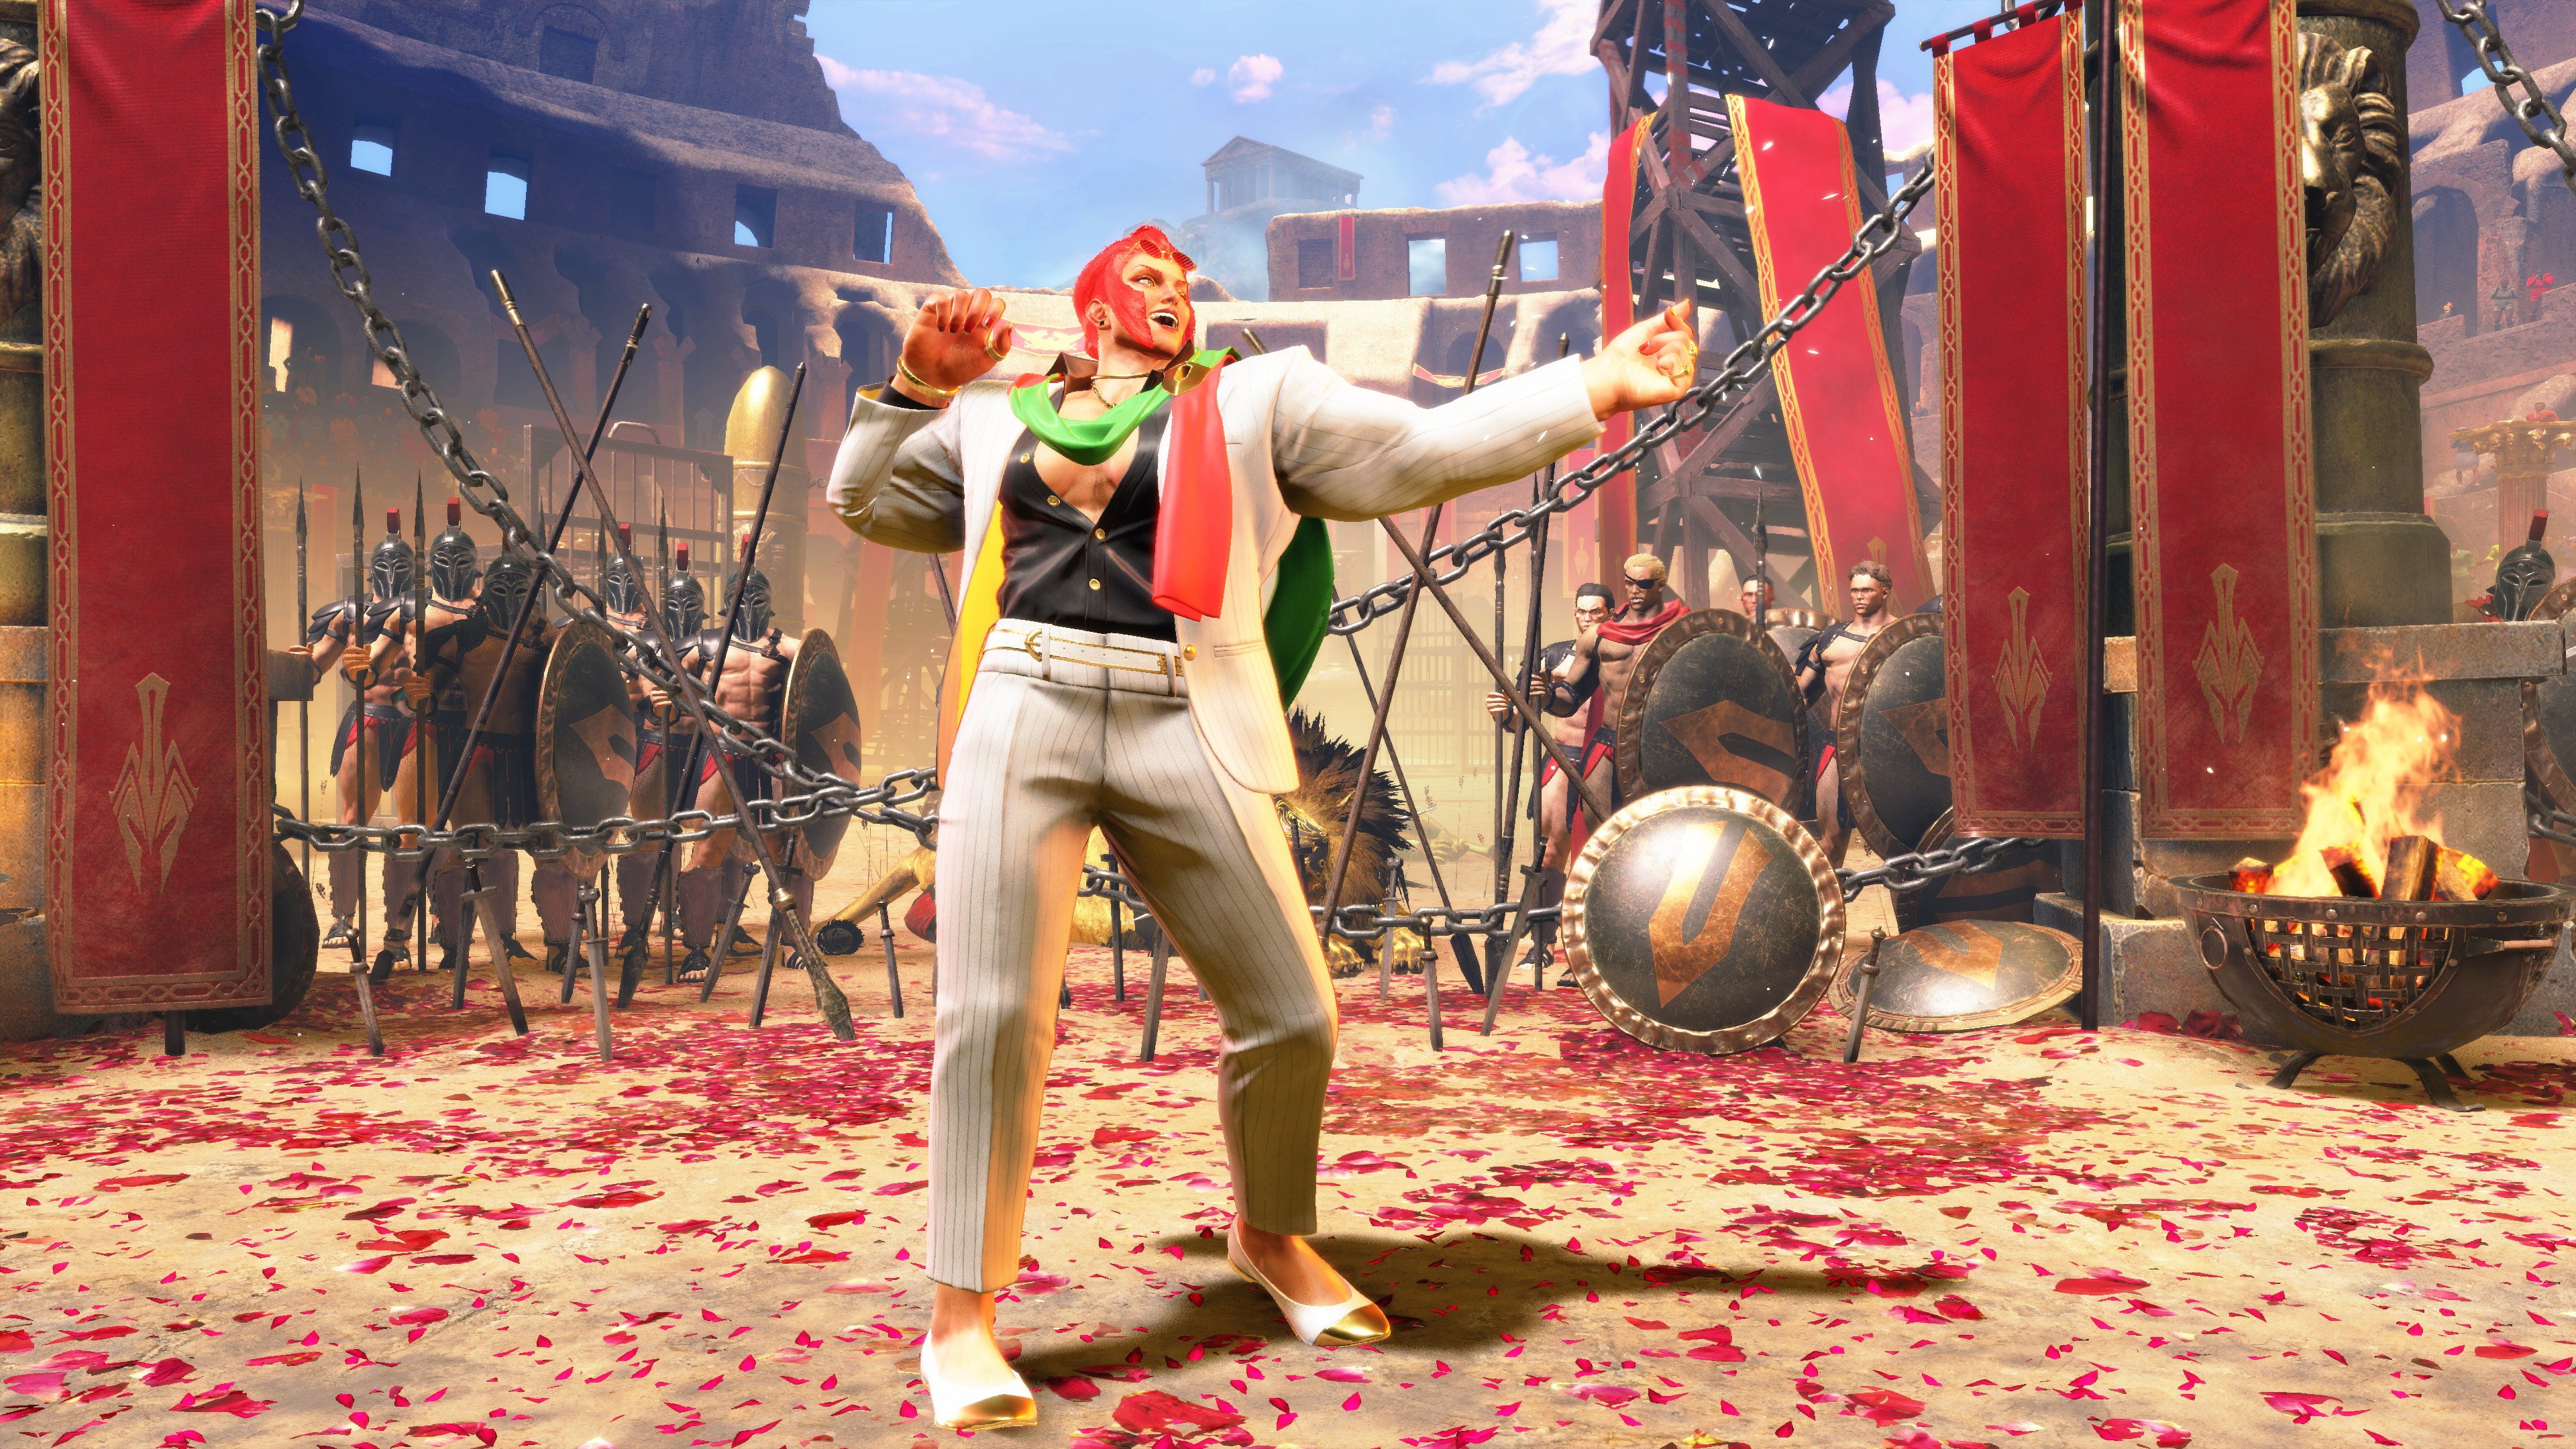 Street Fighter 6' Open Beta Details & How To Sign Up